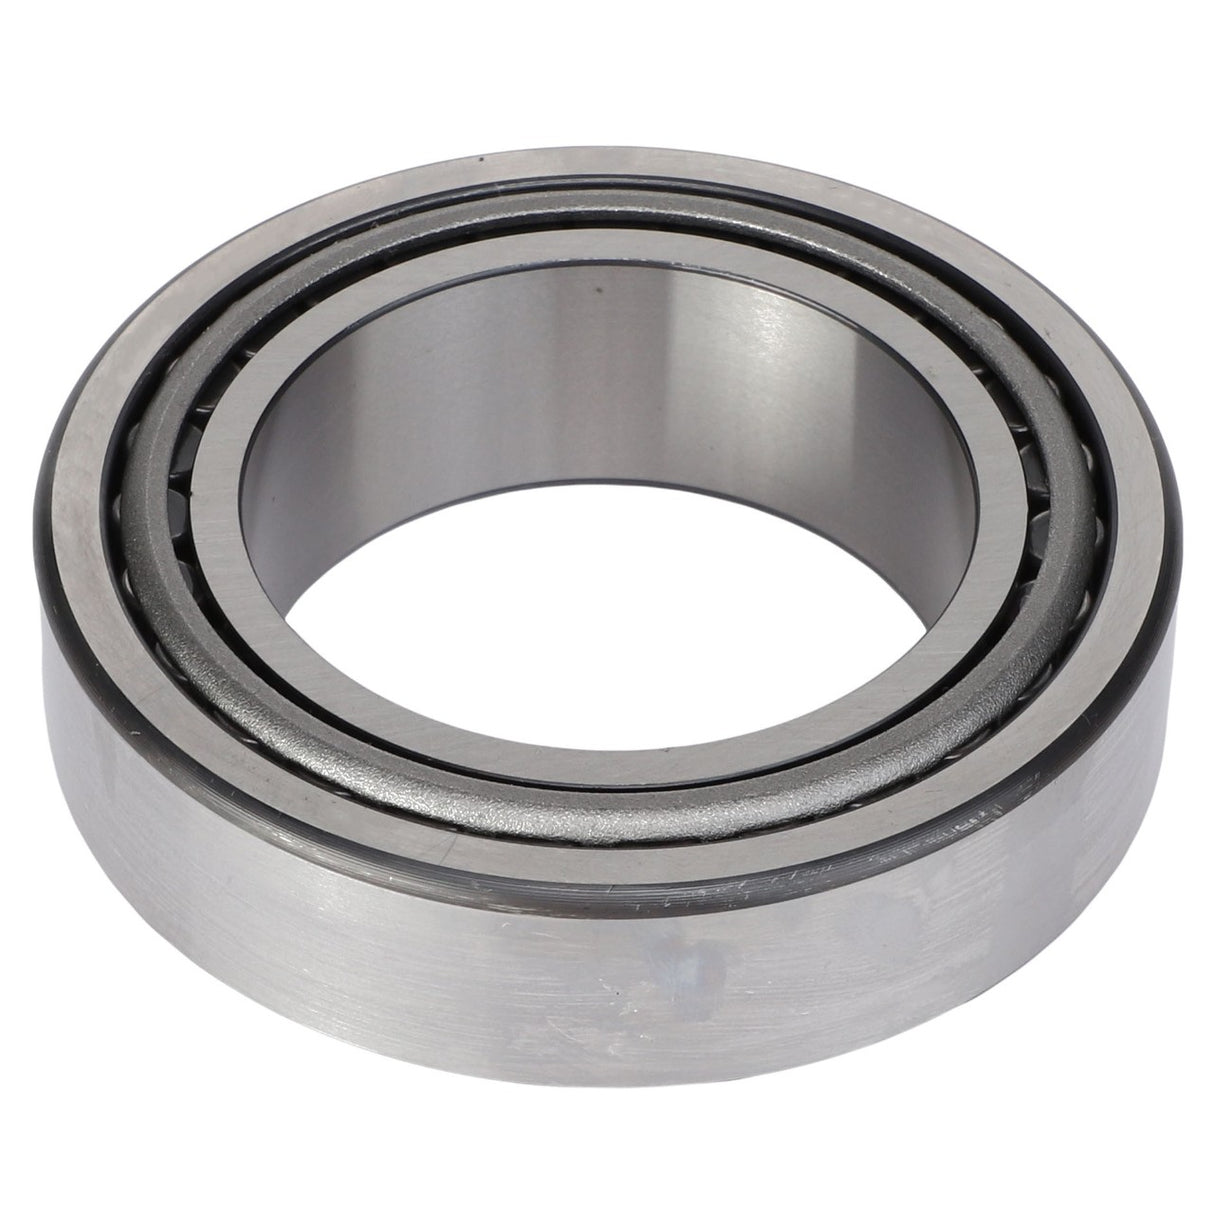 AGCO | Tapered Bearing - Acx0009530 - Farming Parts